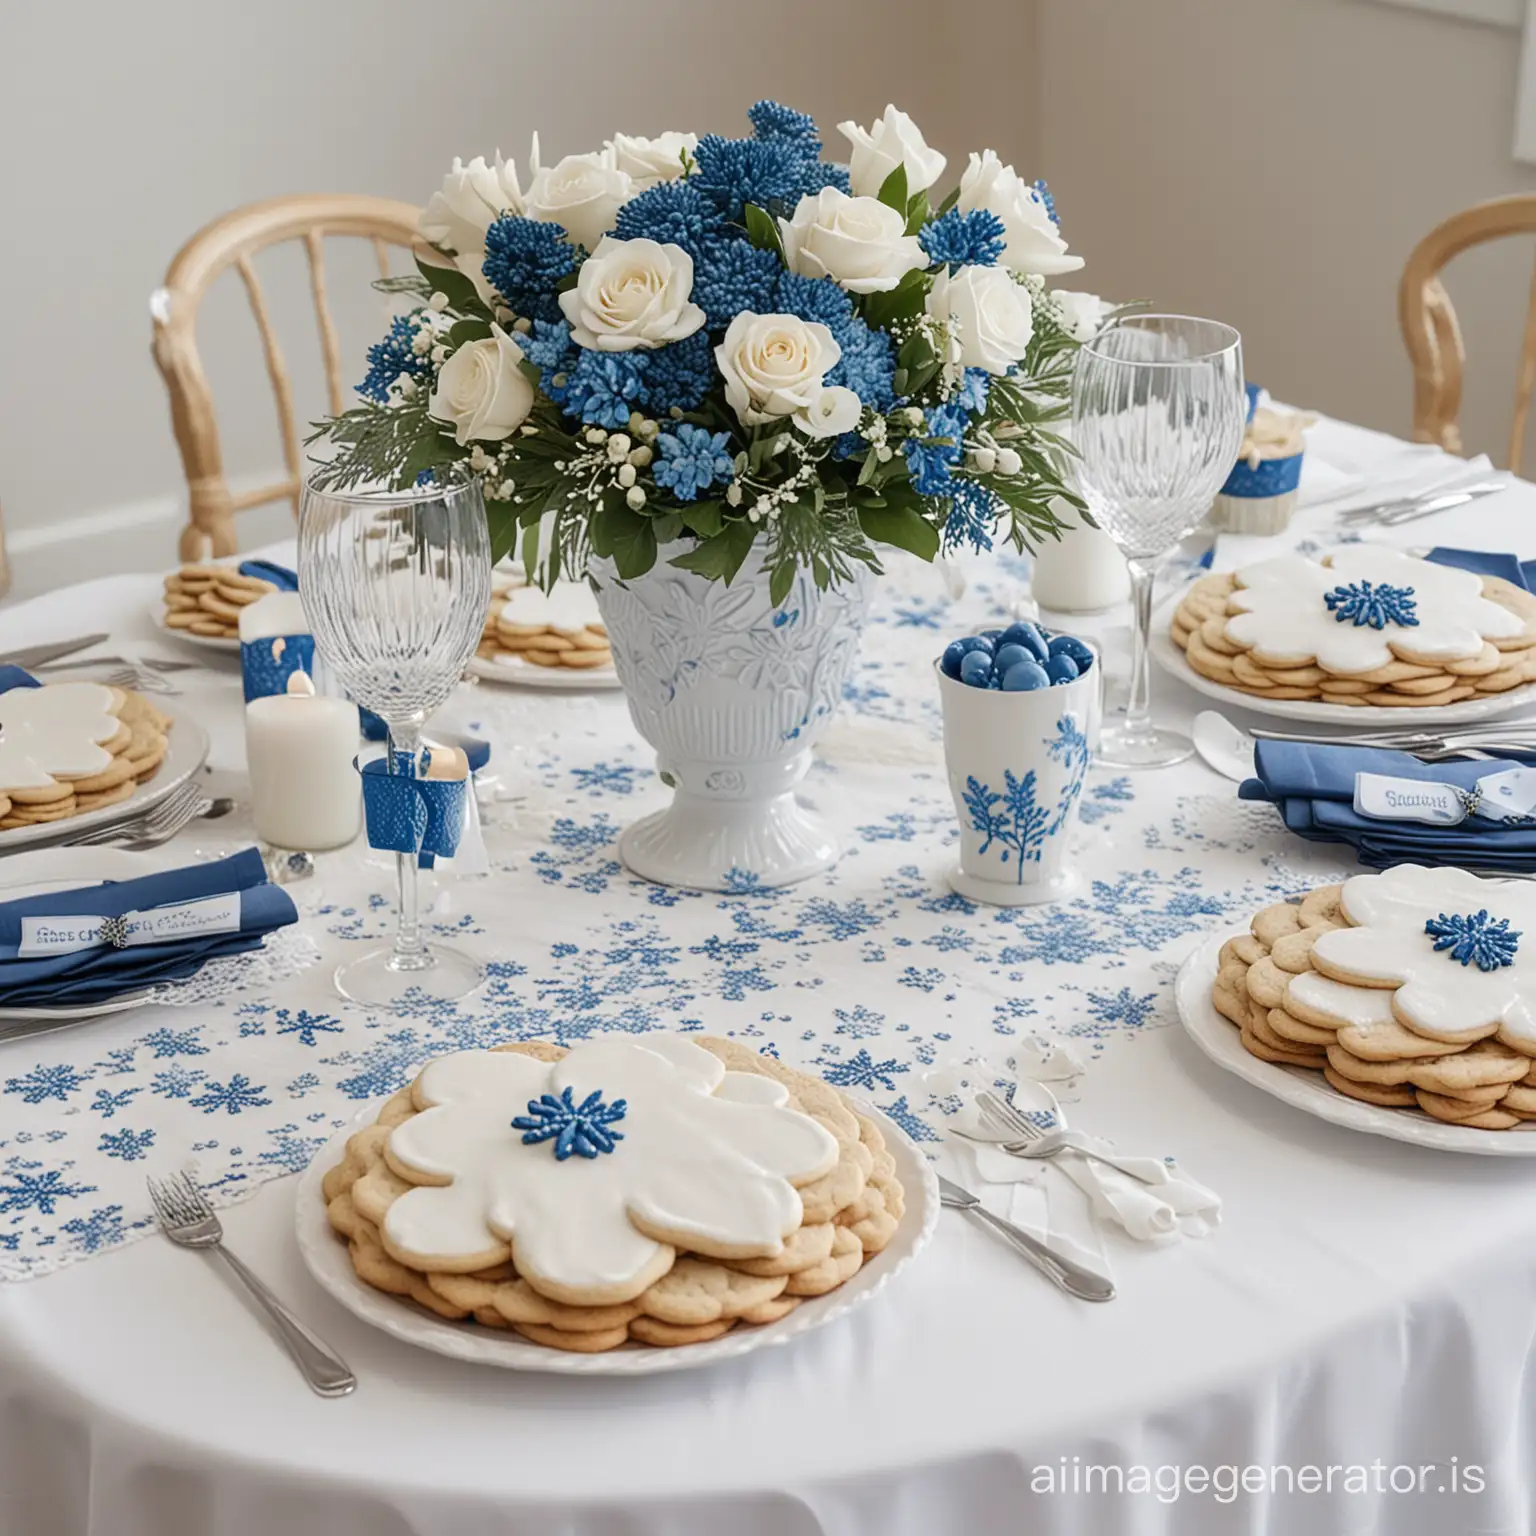 Winter-Wonderland-Wedding-Table-with-Blue-Accents-and-Sugar-Cookie-Centerpieces